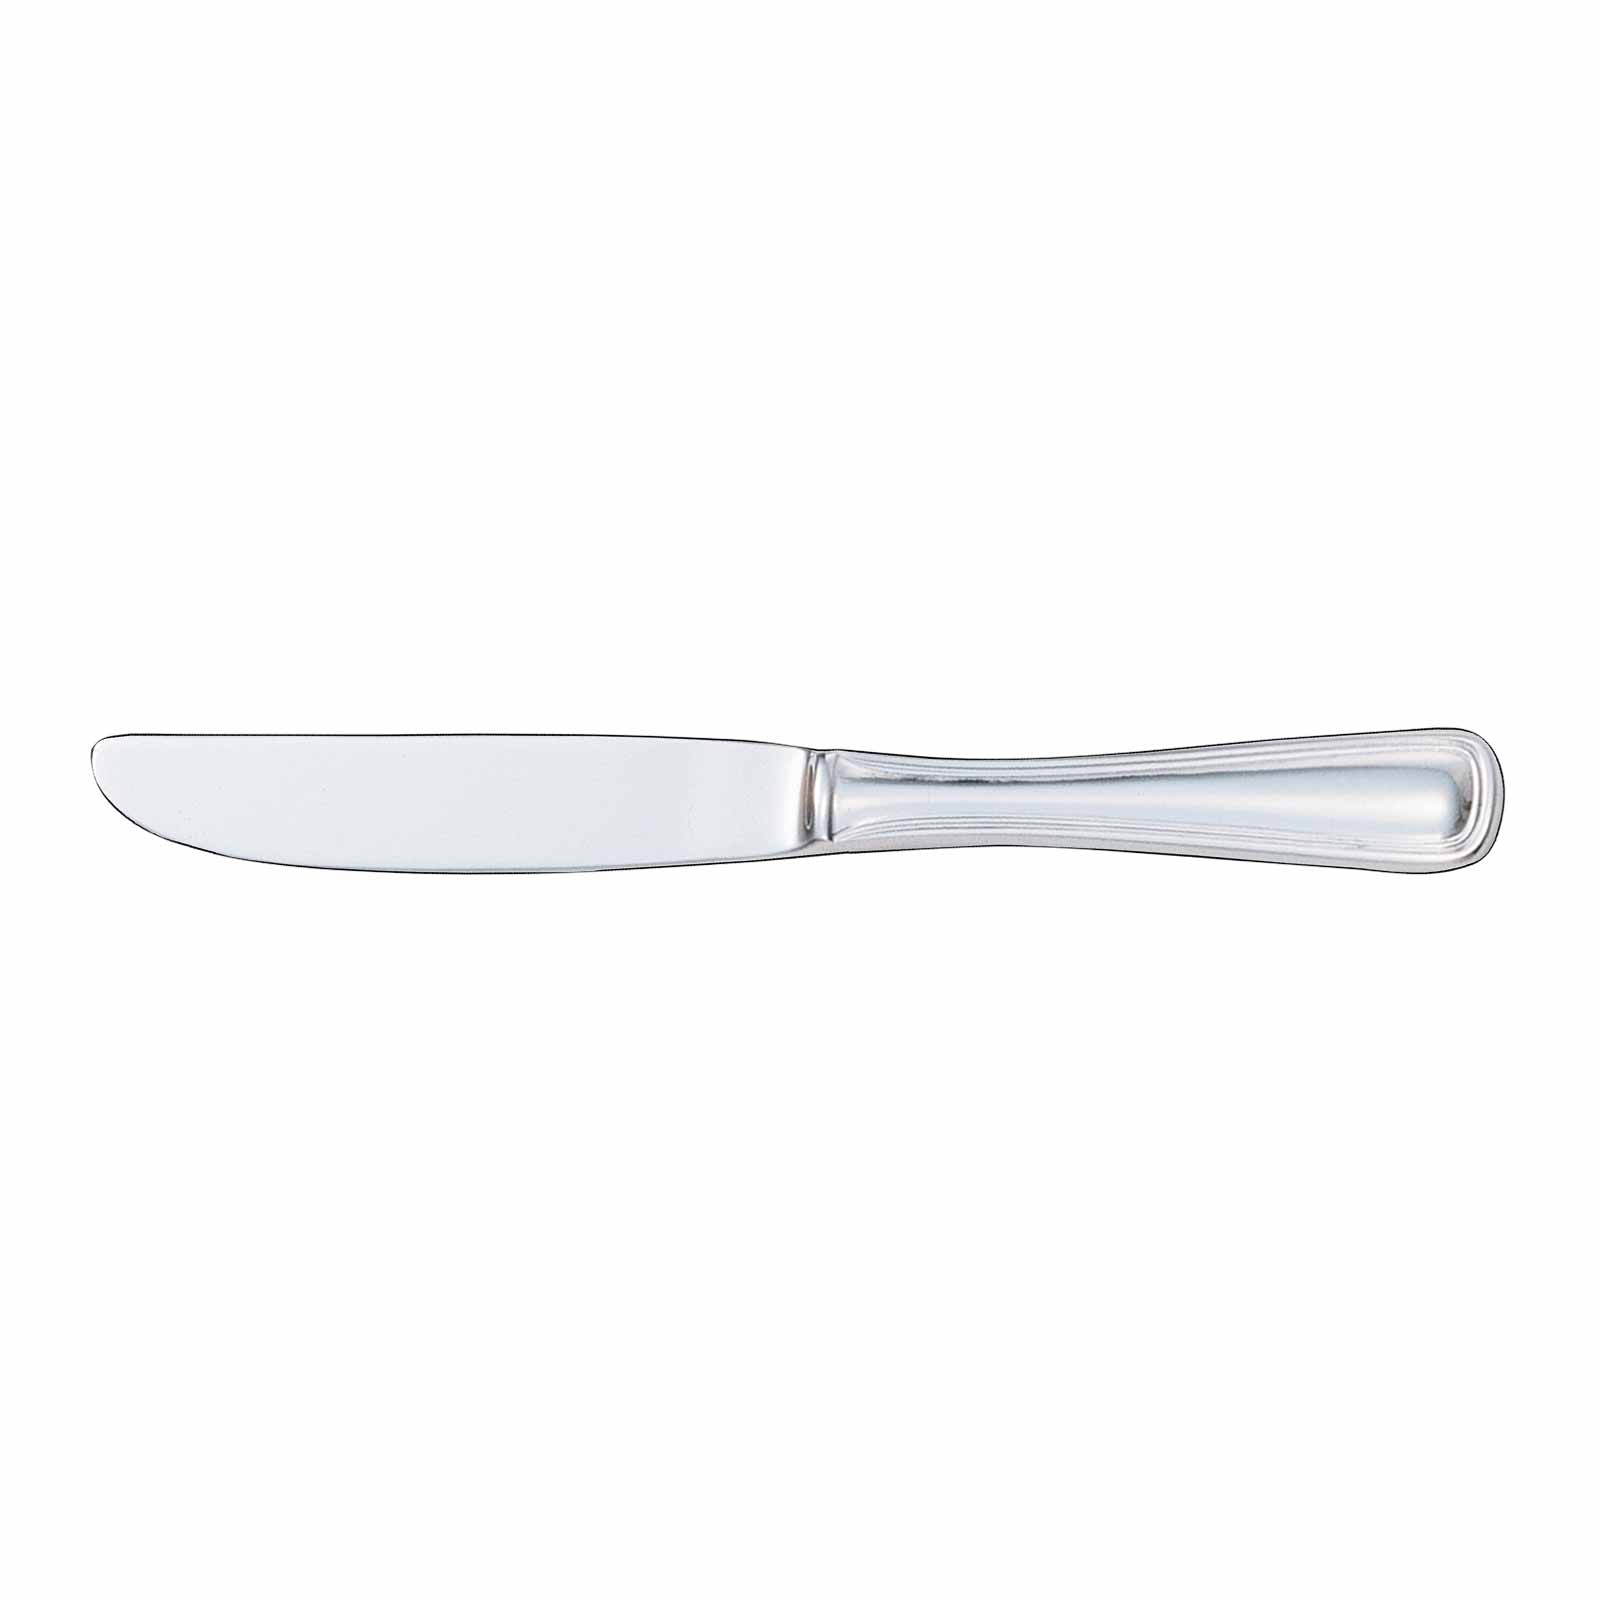 Walco Stainless PAC11 Knife, Butter